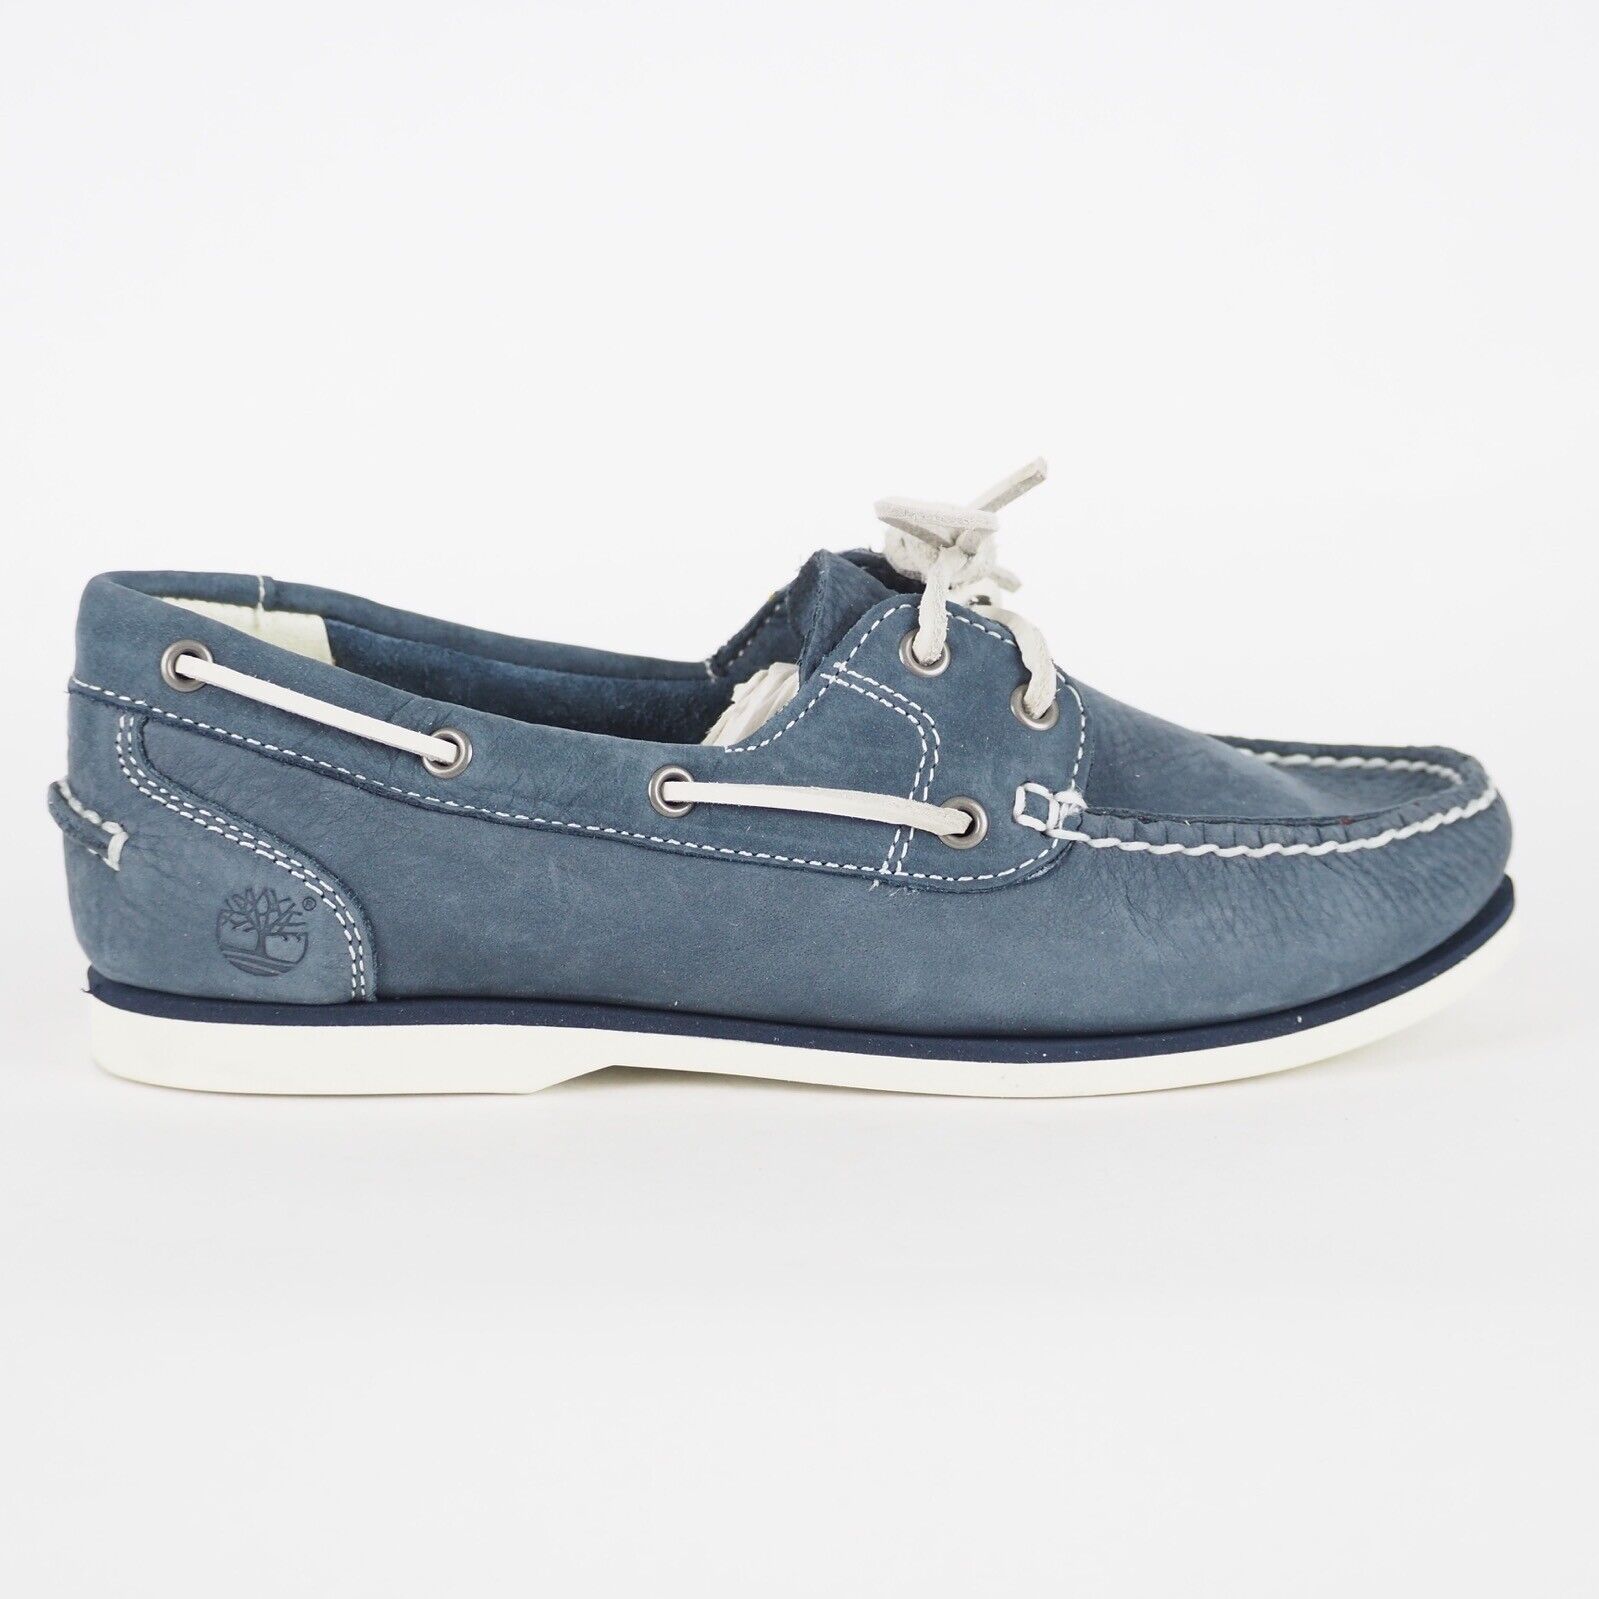 Womens Timberland Lacivert 3937R Blue Leather 2 Eye Laced Casual Boat Shoes